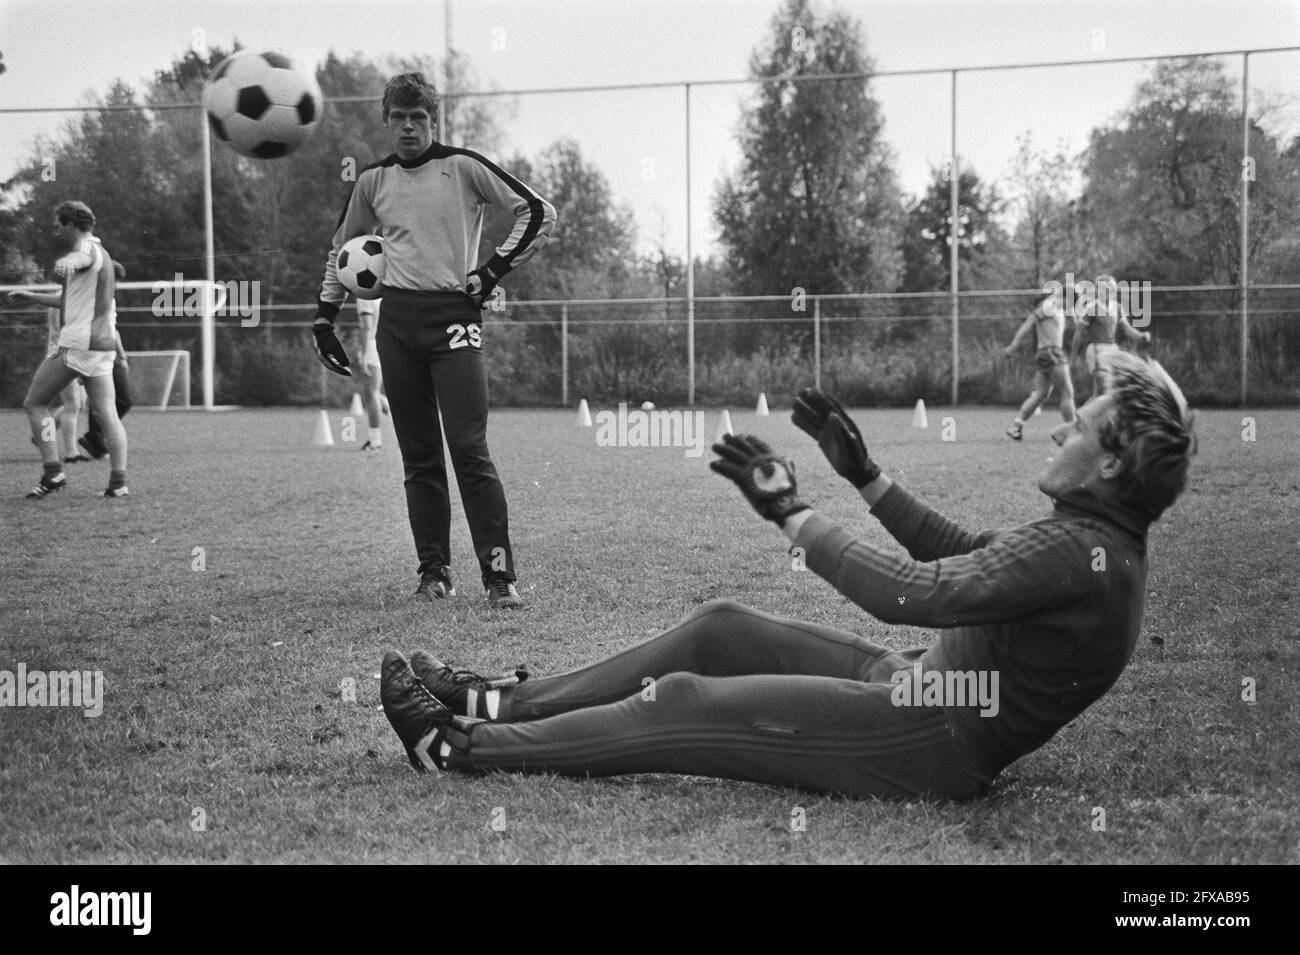 Goalkeeper Van Breukelen during training, September 28, 1981, goalkeepers, sports, training, soccer, The Netherlands, 20th century press agency photo, news to remember, documentary, historic photography 1945-1990, visual stories, human history of the Twentieth Century, capturing moments in time Stock Photo